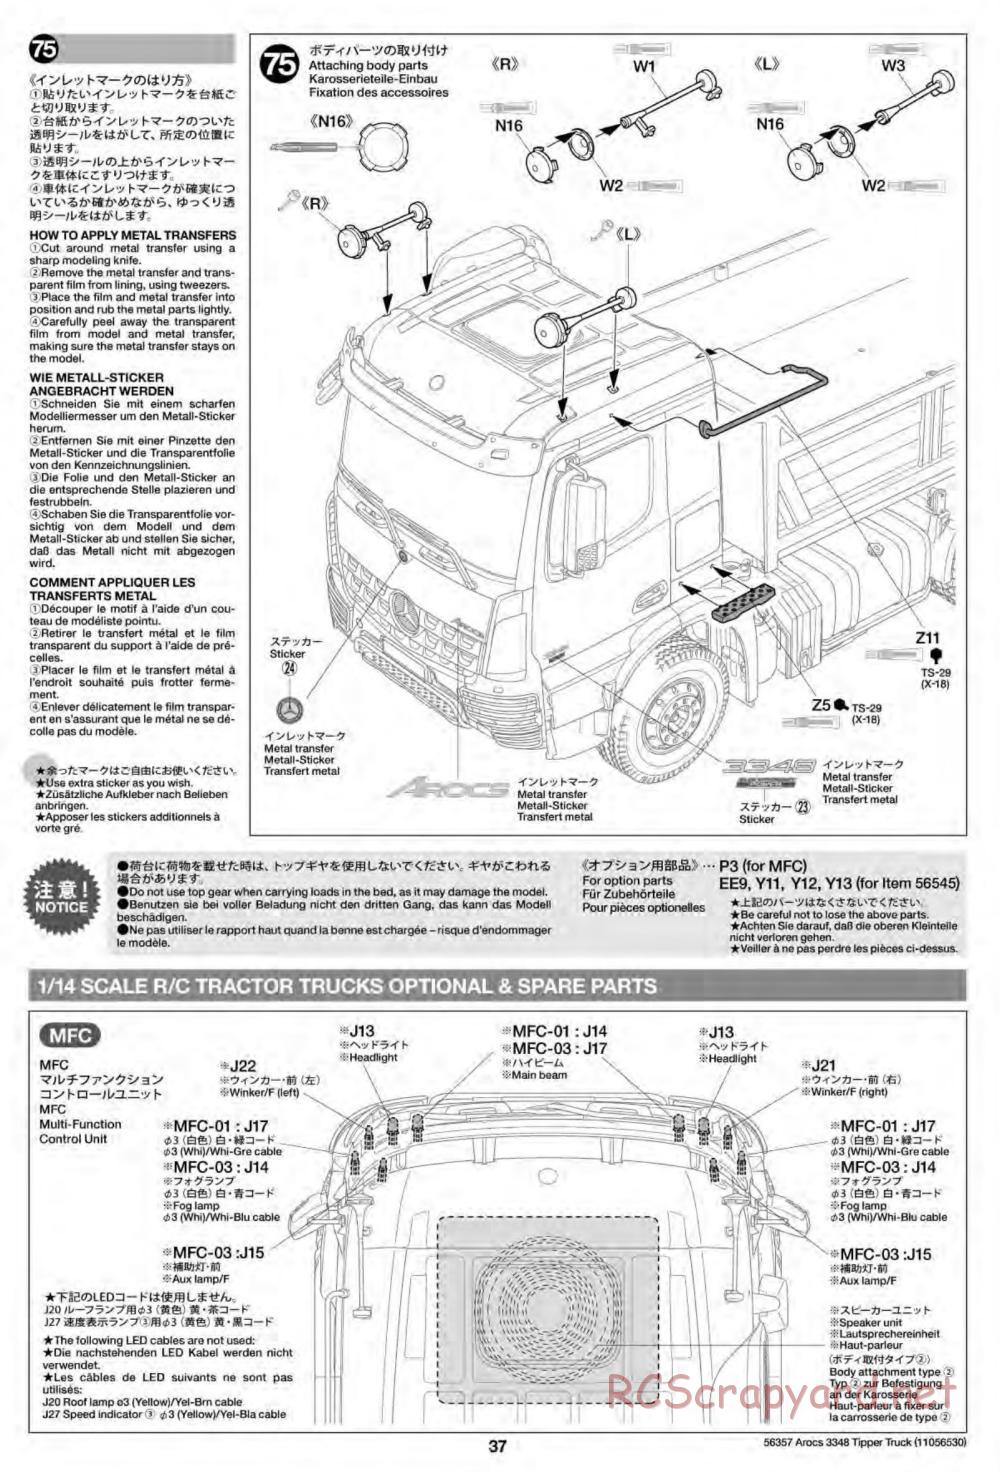 Tamiya - Mercedes-Benz Arocs 3348 6x4 Tipper Truck Chassis - Manual - Page 37